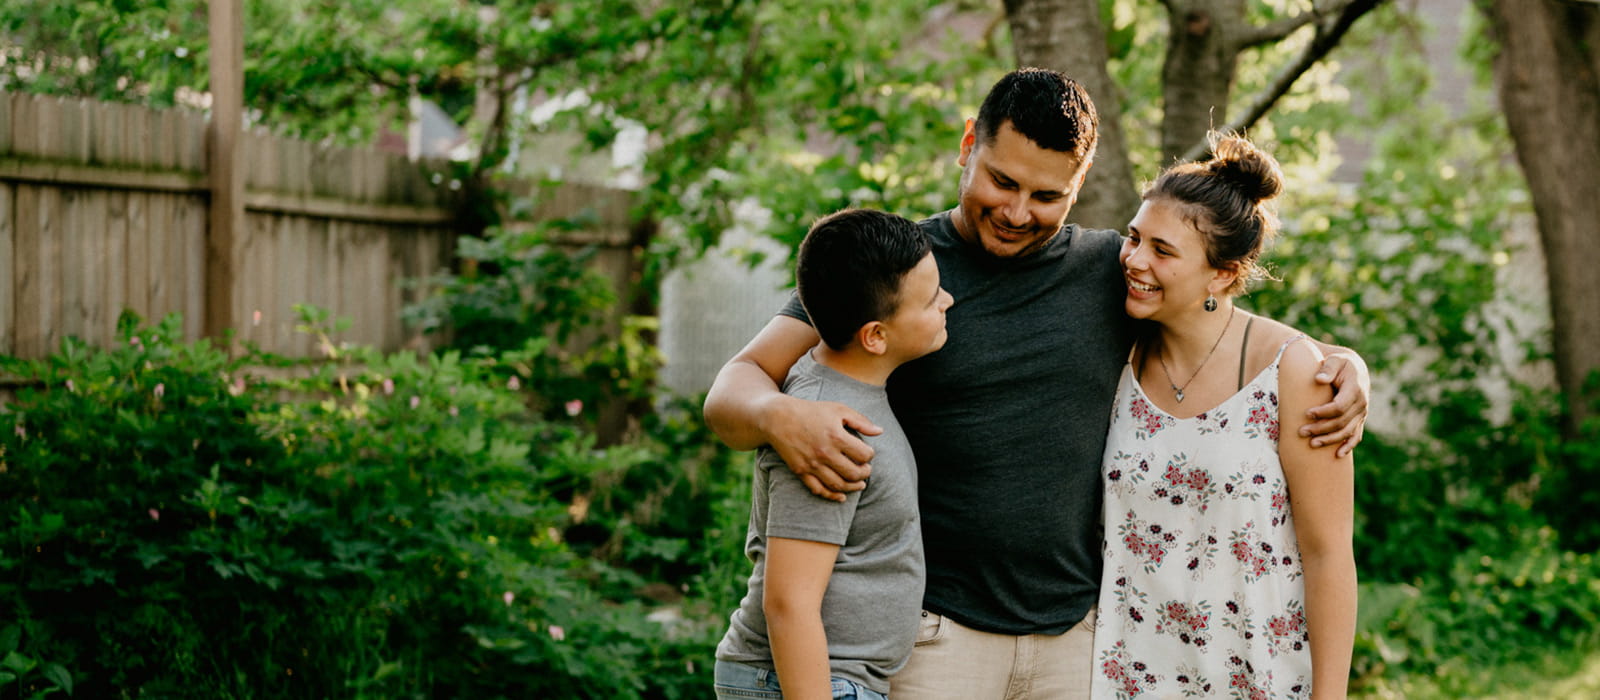 Family standing in yard embracing and  smiling at each other.